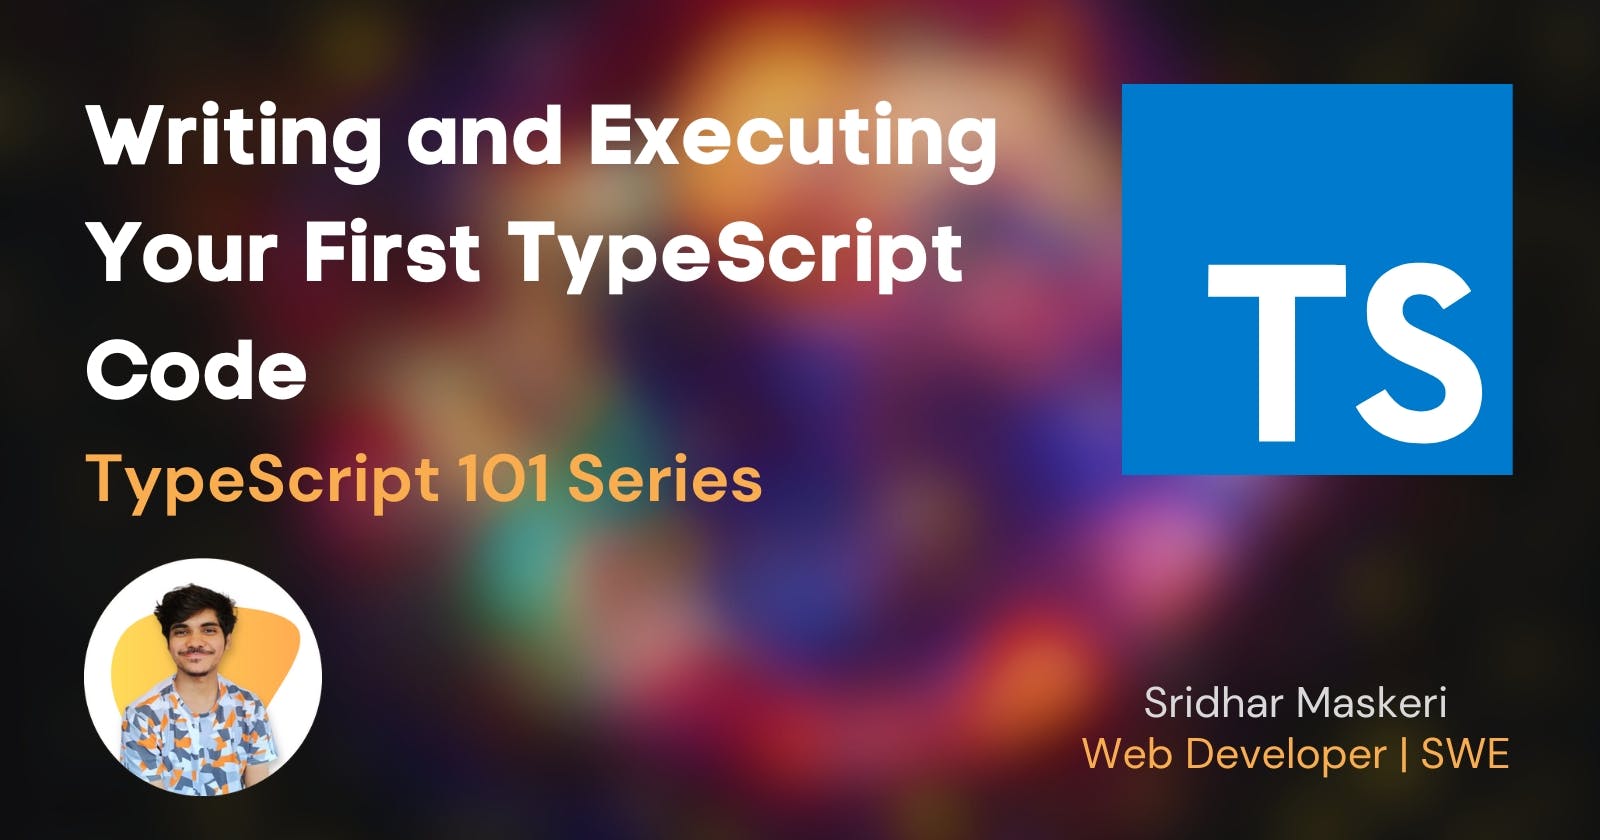 Writing and Executing Your First TypeScript Code